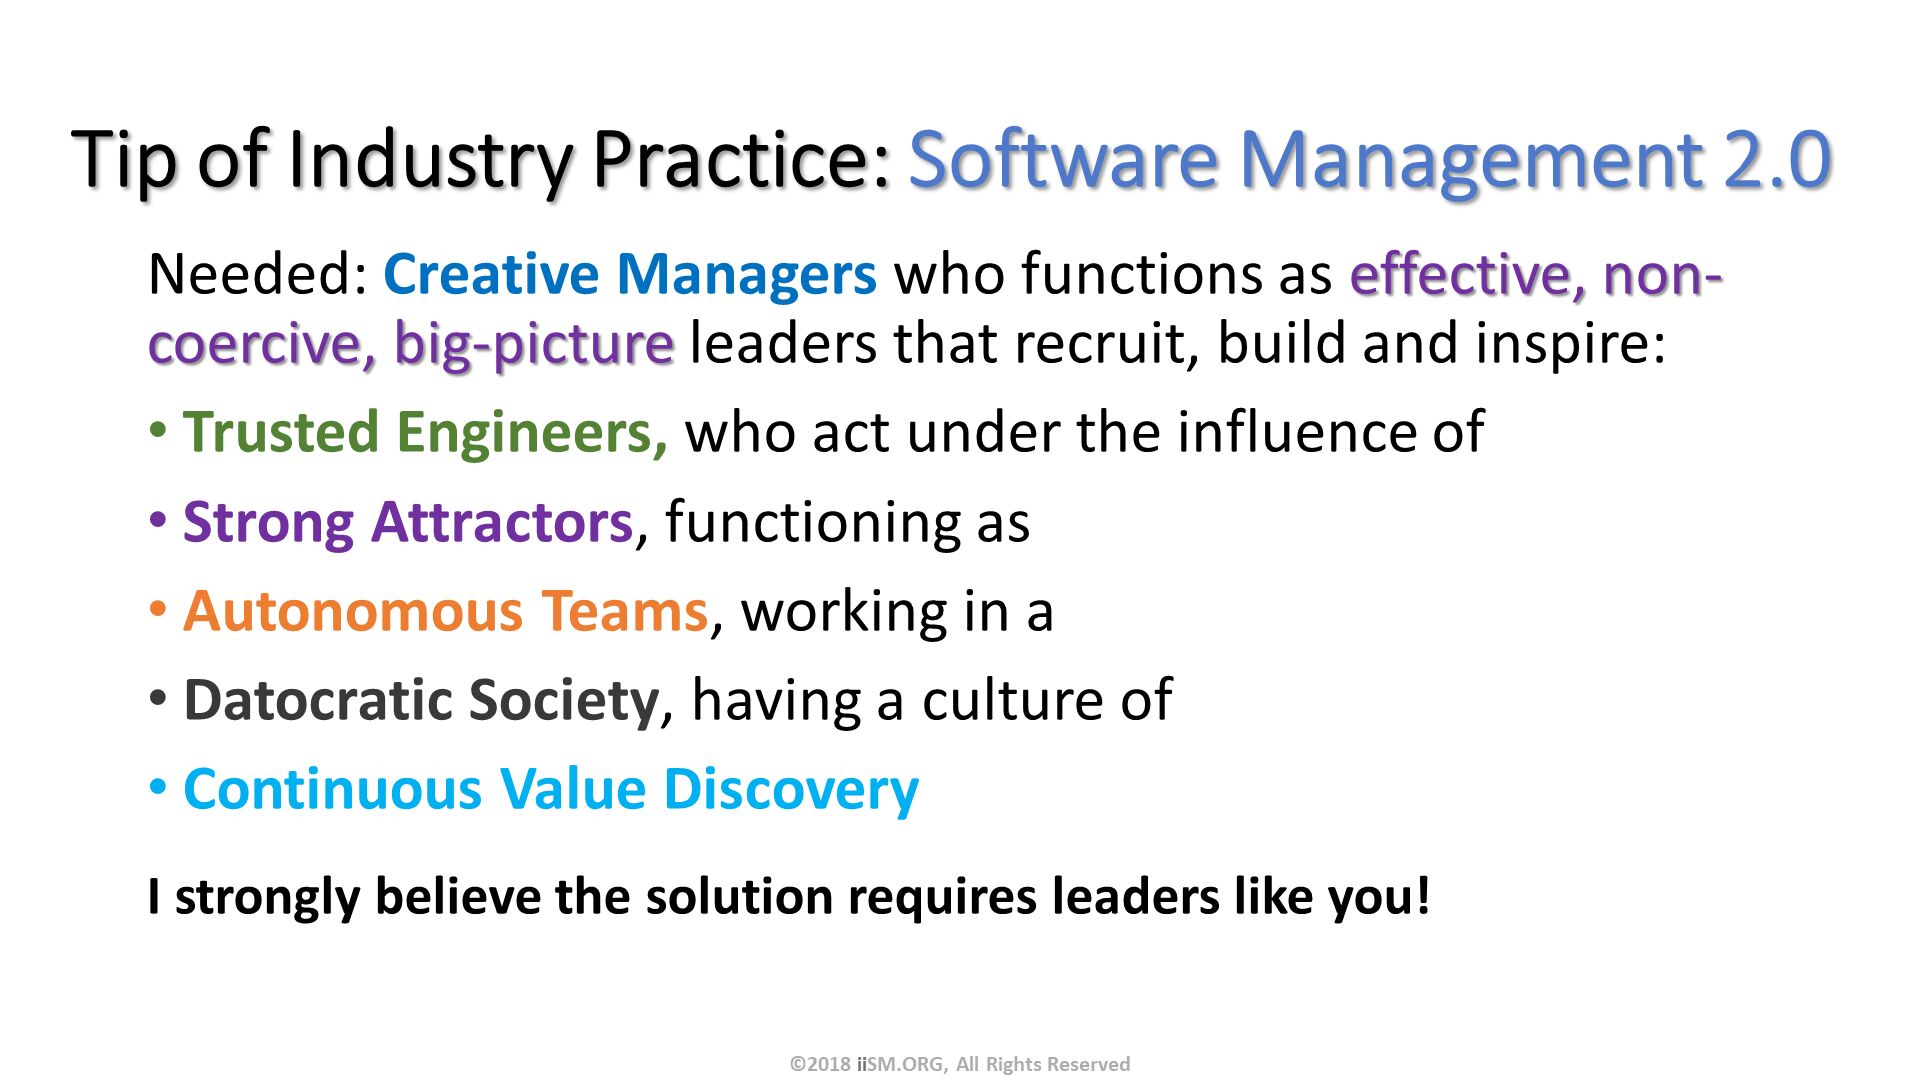 Tip of Industry Practice: Software Management 2.0. Needed: Creative Managers who functions as effective, non-coercive, big-picture leaders that recruit, build and inspire:
Trusted Engineers, who act under the influence of
Strong Attractors, functioning as 
Autonomous Teams, working in a
Datocratic Society, having a culture of
Continuous Value Discovery

I strongly believe the solution requires leaders like you!. ©2018 iiSM.ORG, All Rights Reserved. 